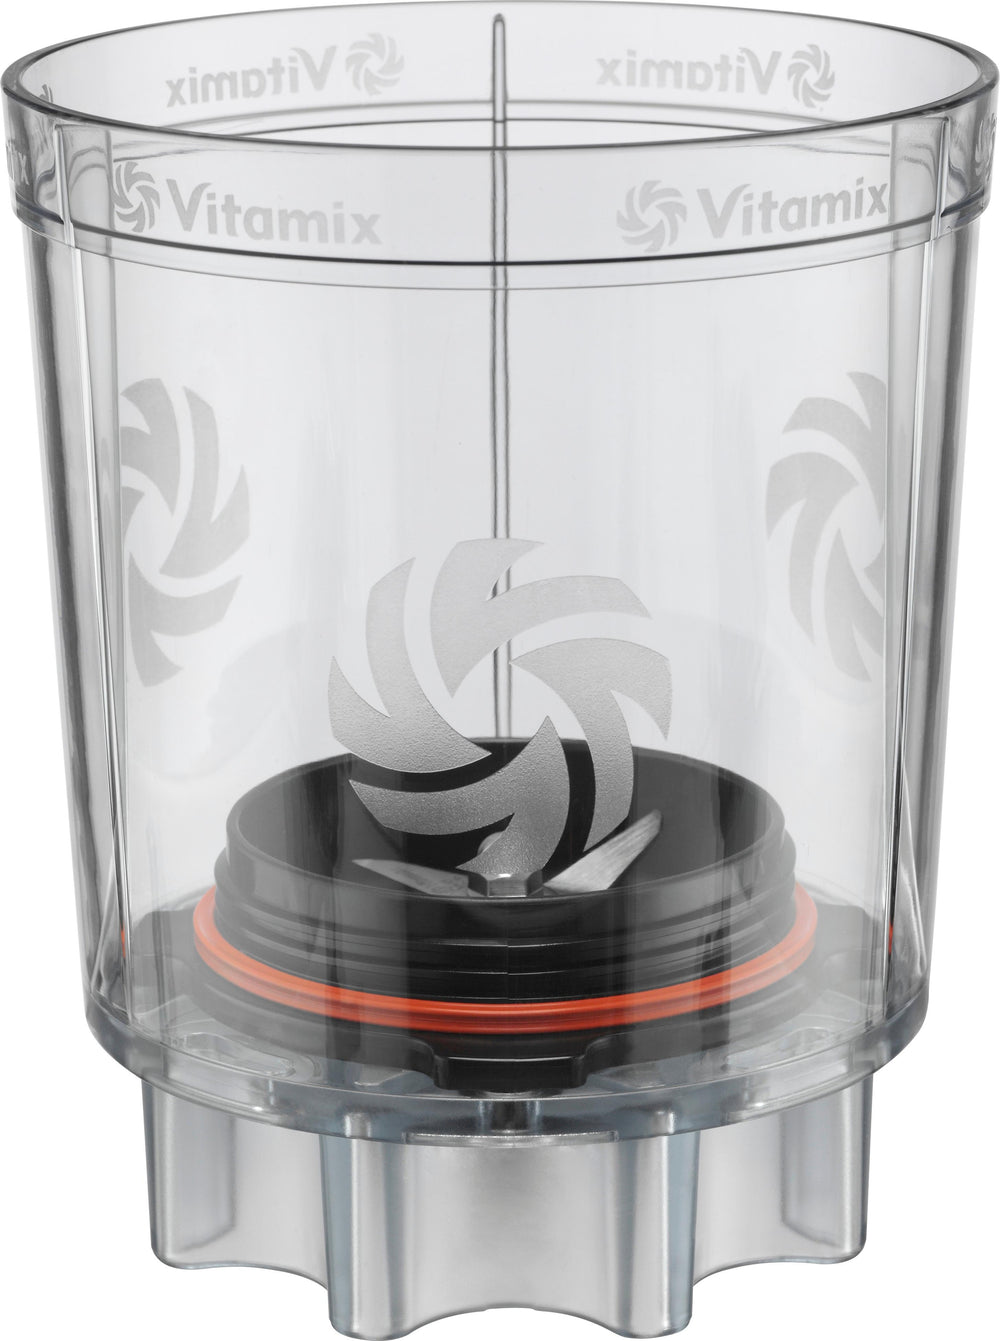 Personal Cup Adapter Kit for Vitamix Legacy Series Blenders - Clear/Transparent_1